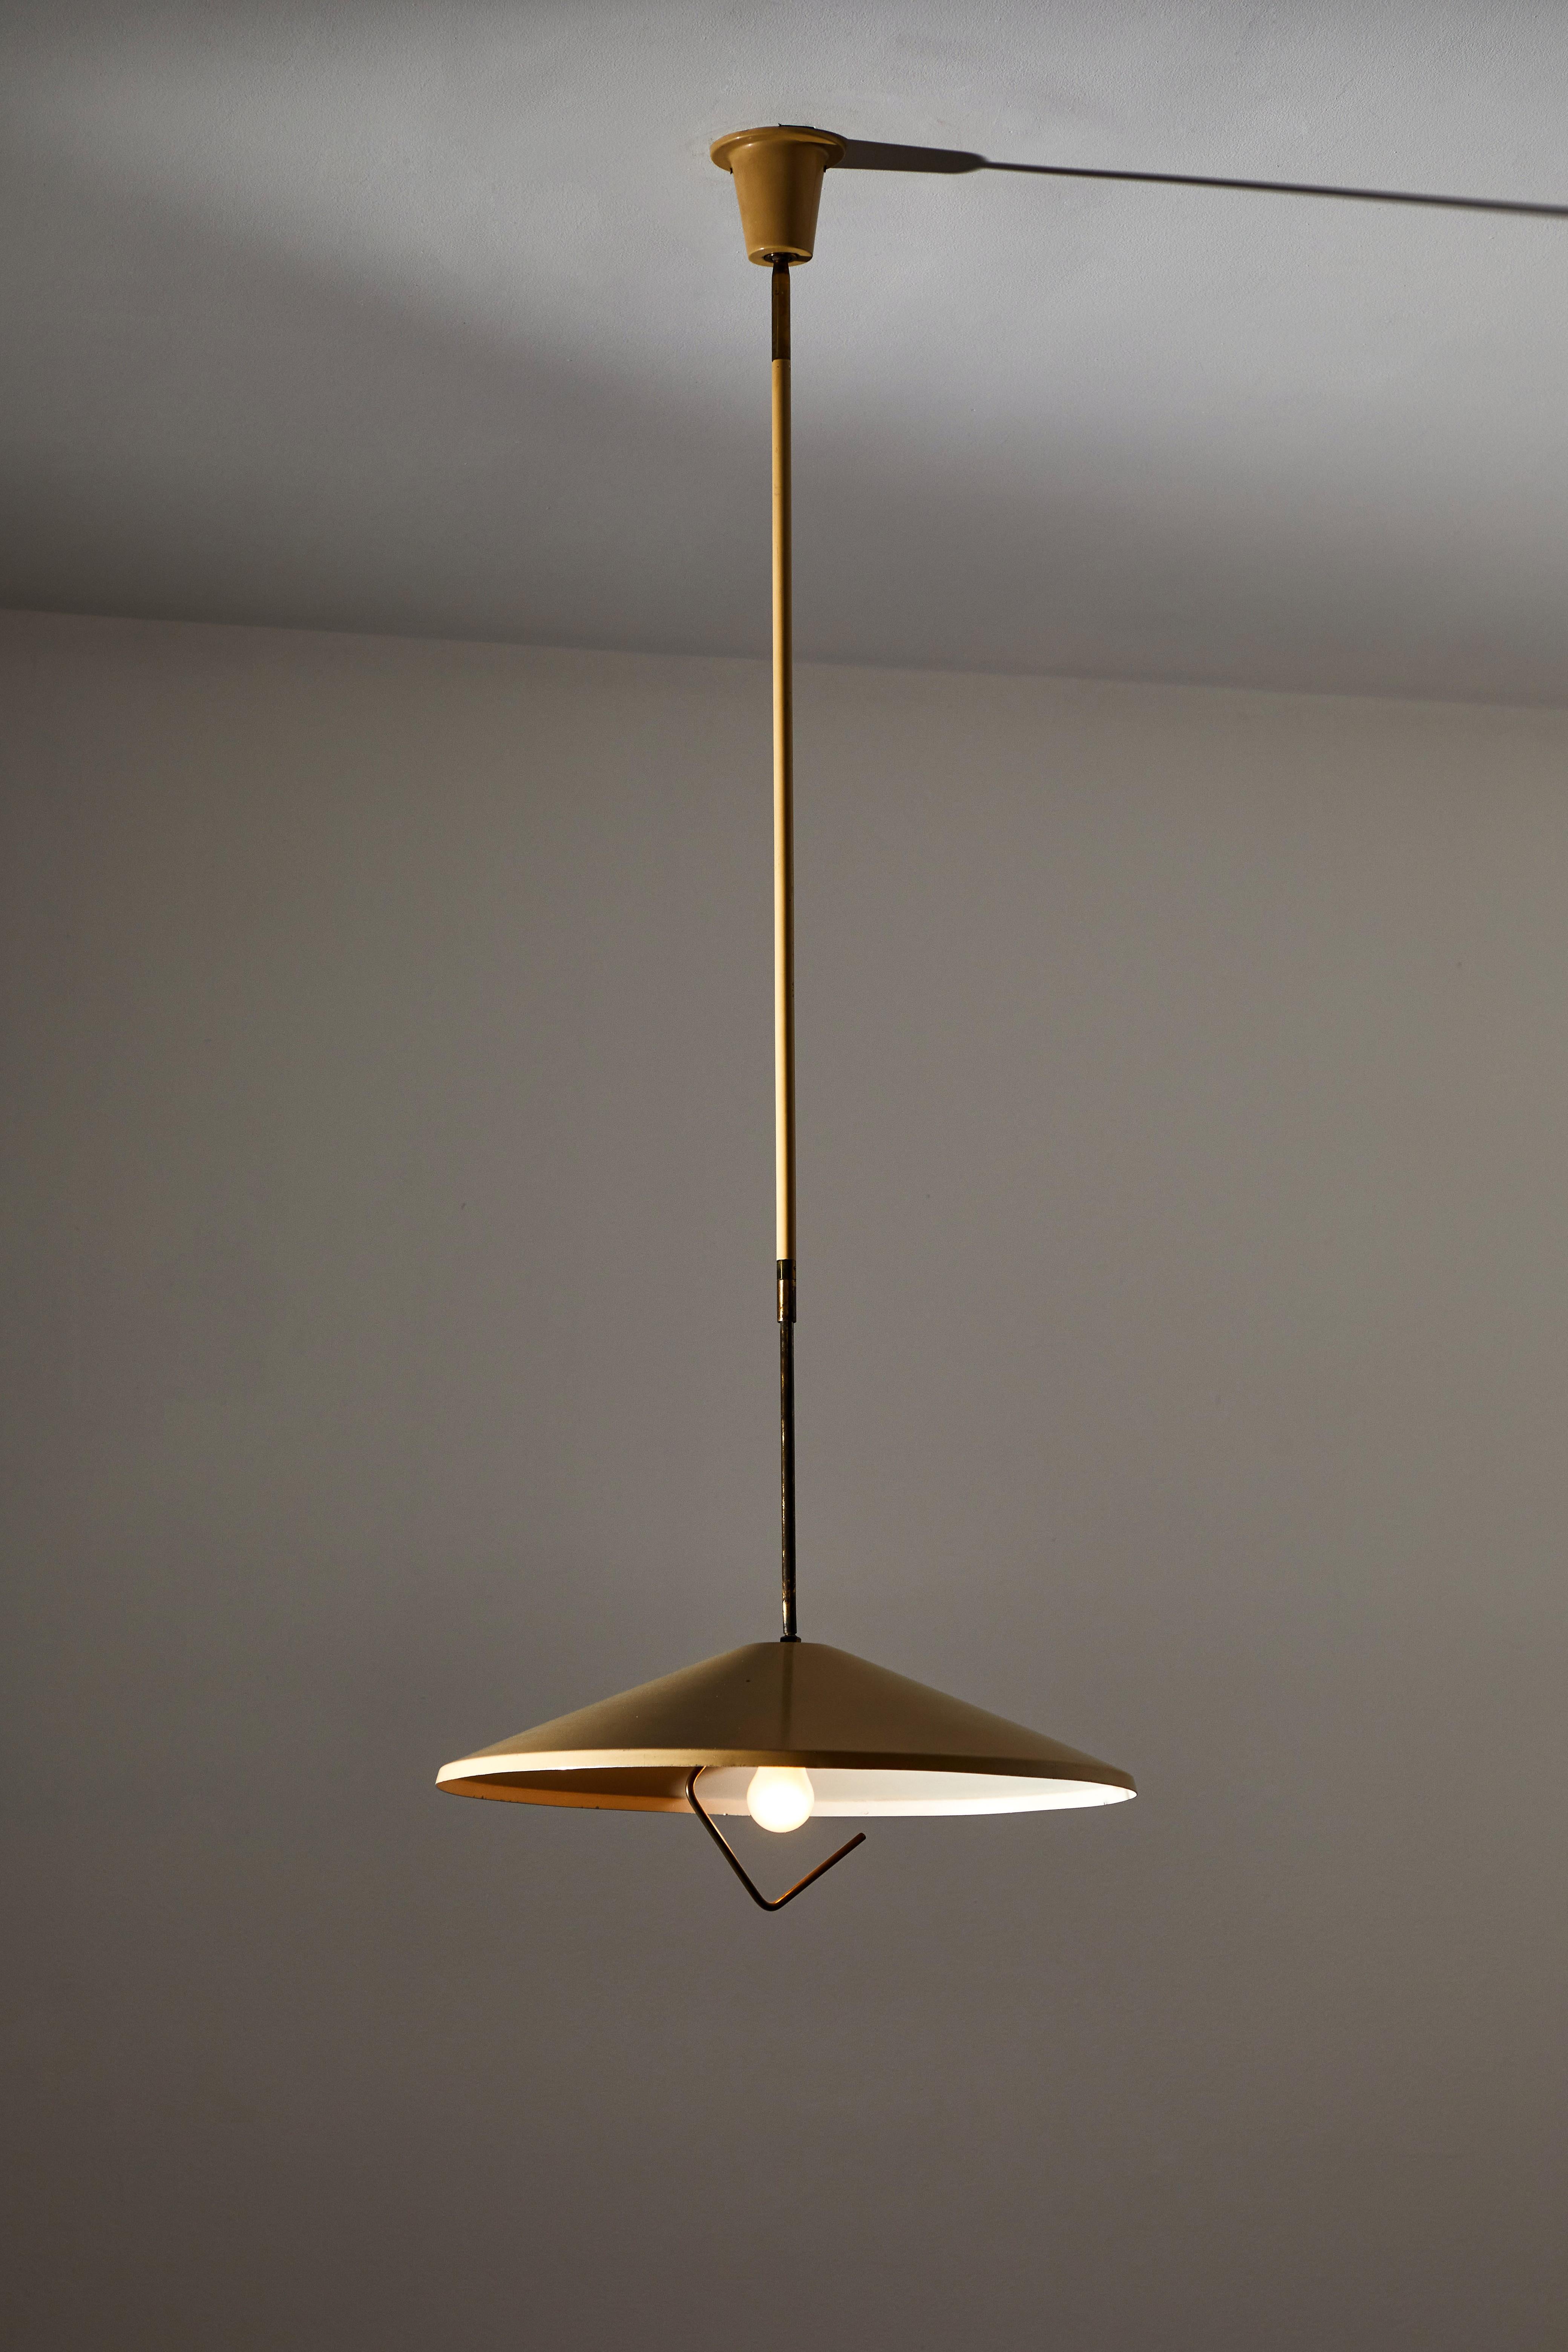 Model G6 Suspension Light by Bruno Gerosa for Lumen. Designed and manufactured in Italy, circa 1950s. Brass, painted aluminum. Rewired for U.S. standards. Original canopy, custom ceiling plate. Ball joint at top of fixture adjust 360 degrees. Height